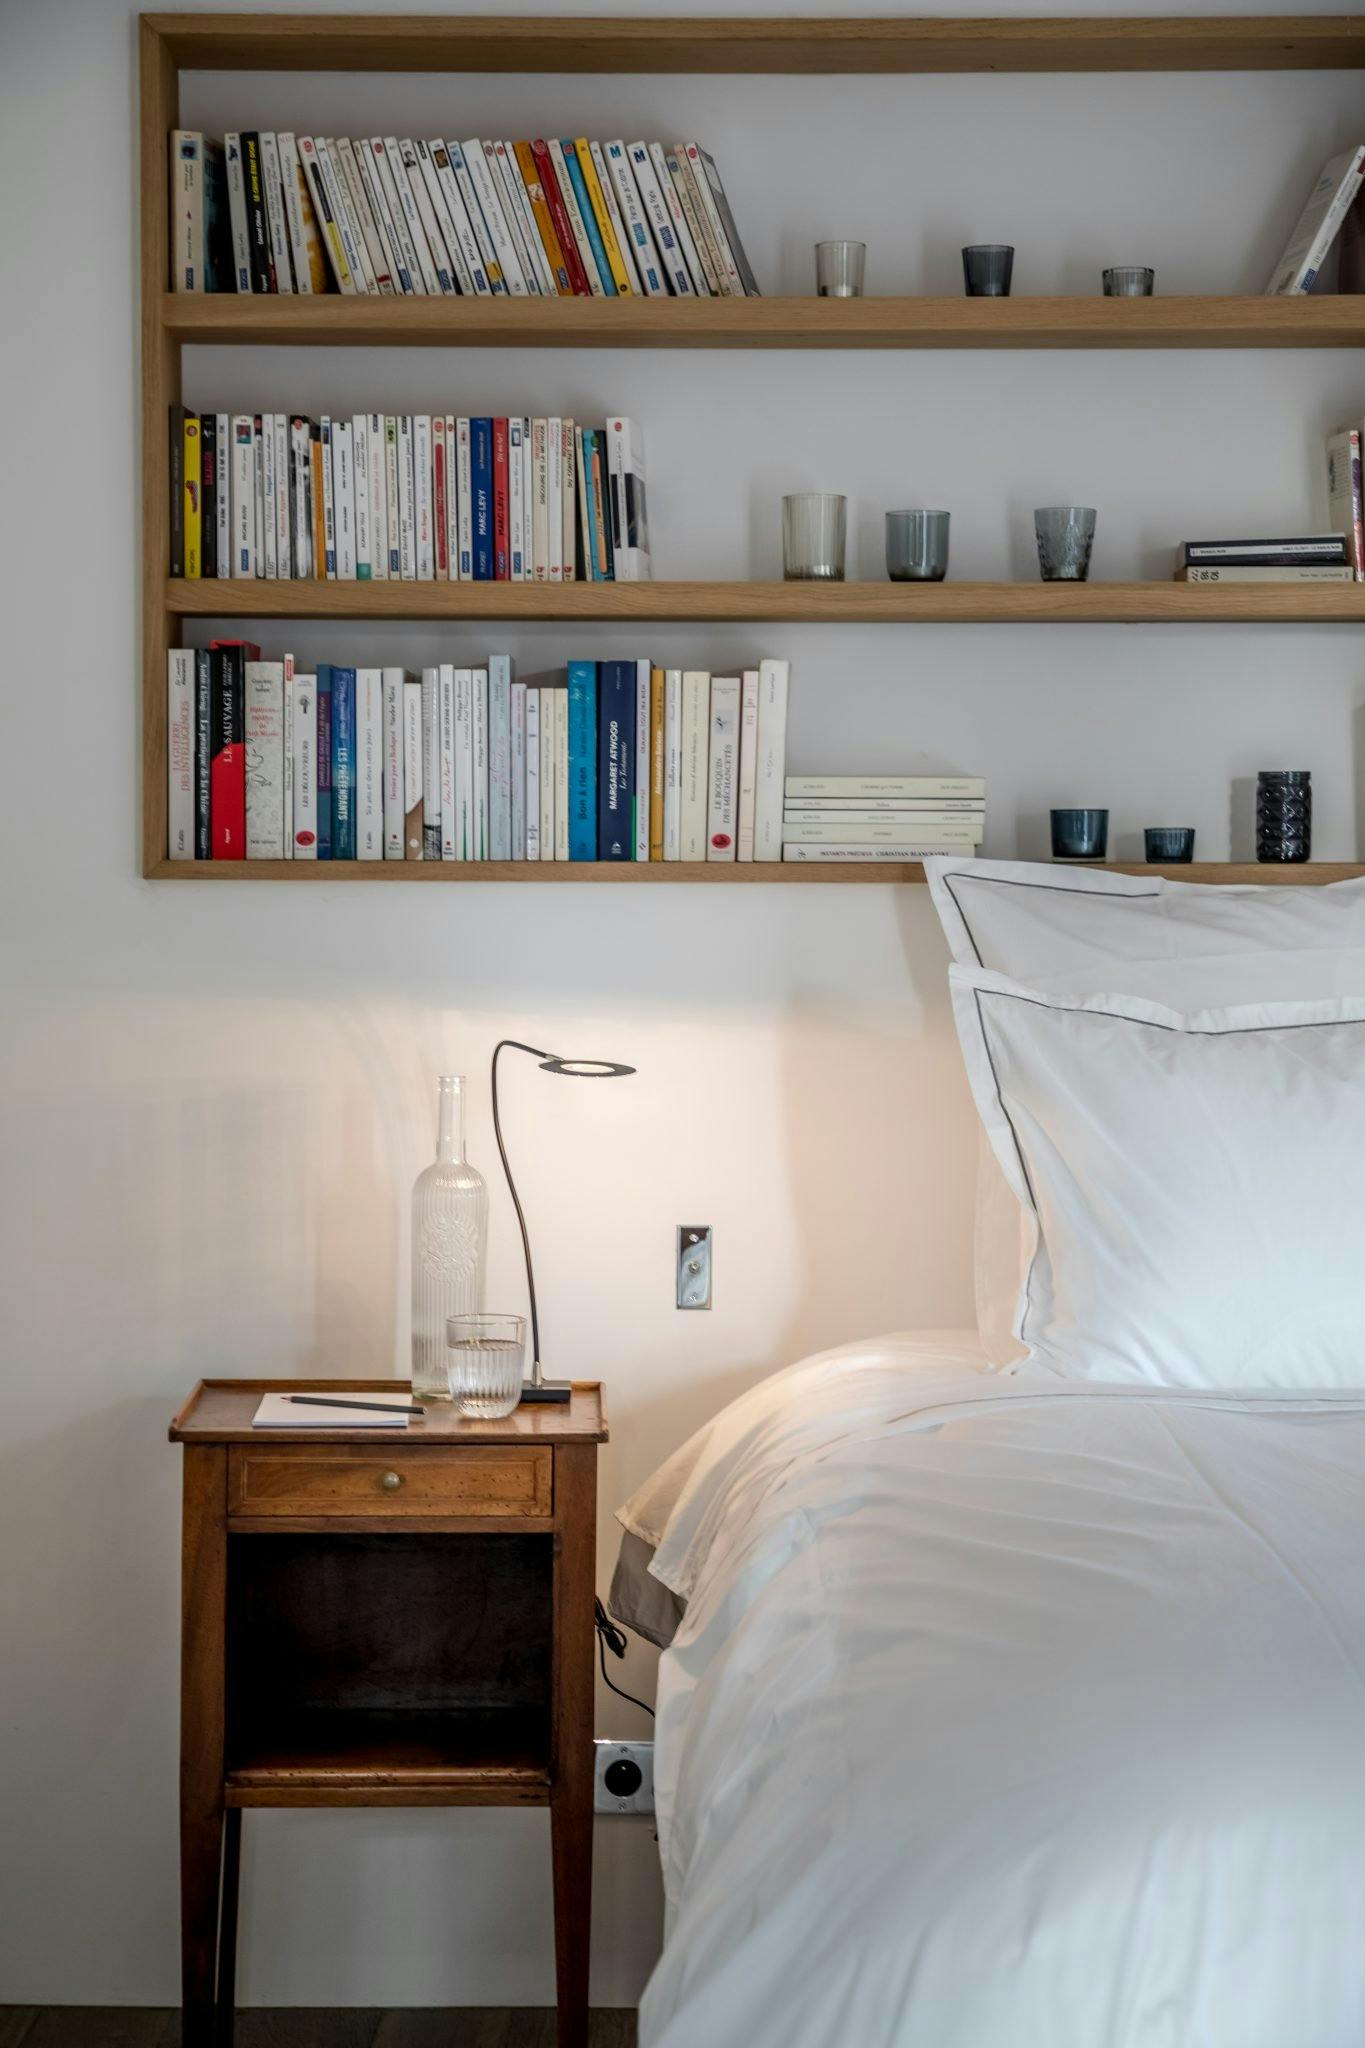 Bedroom topped by a bookshelf and wooden bedside table